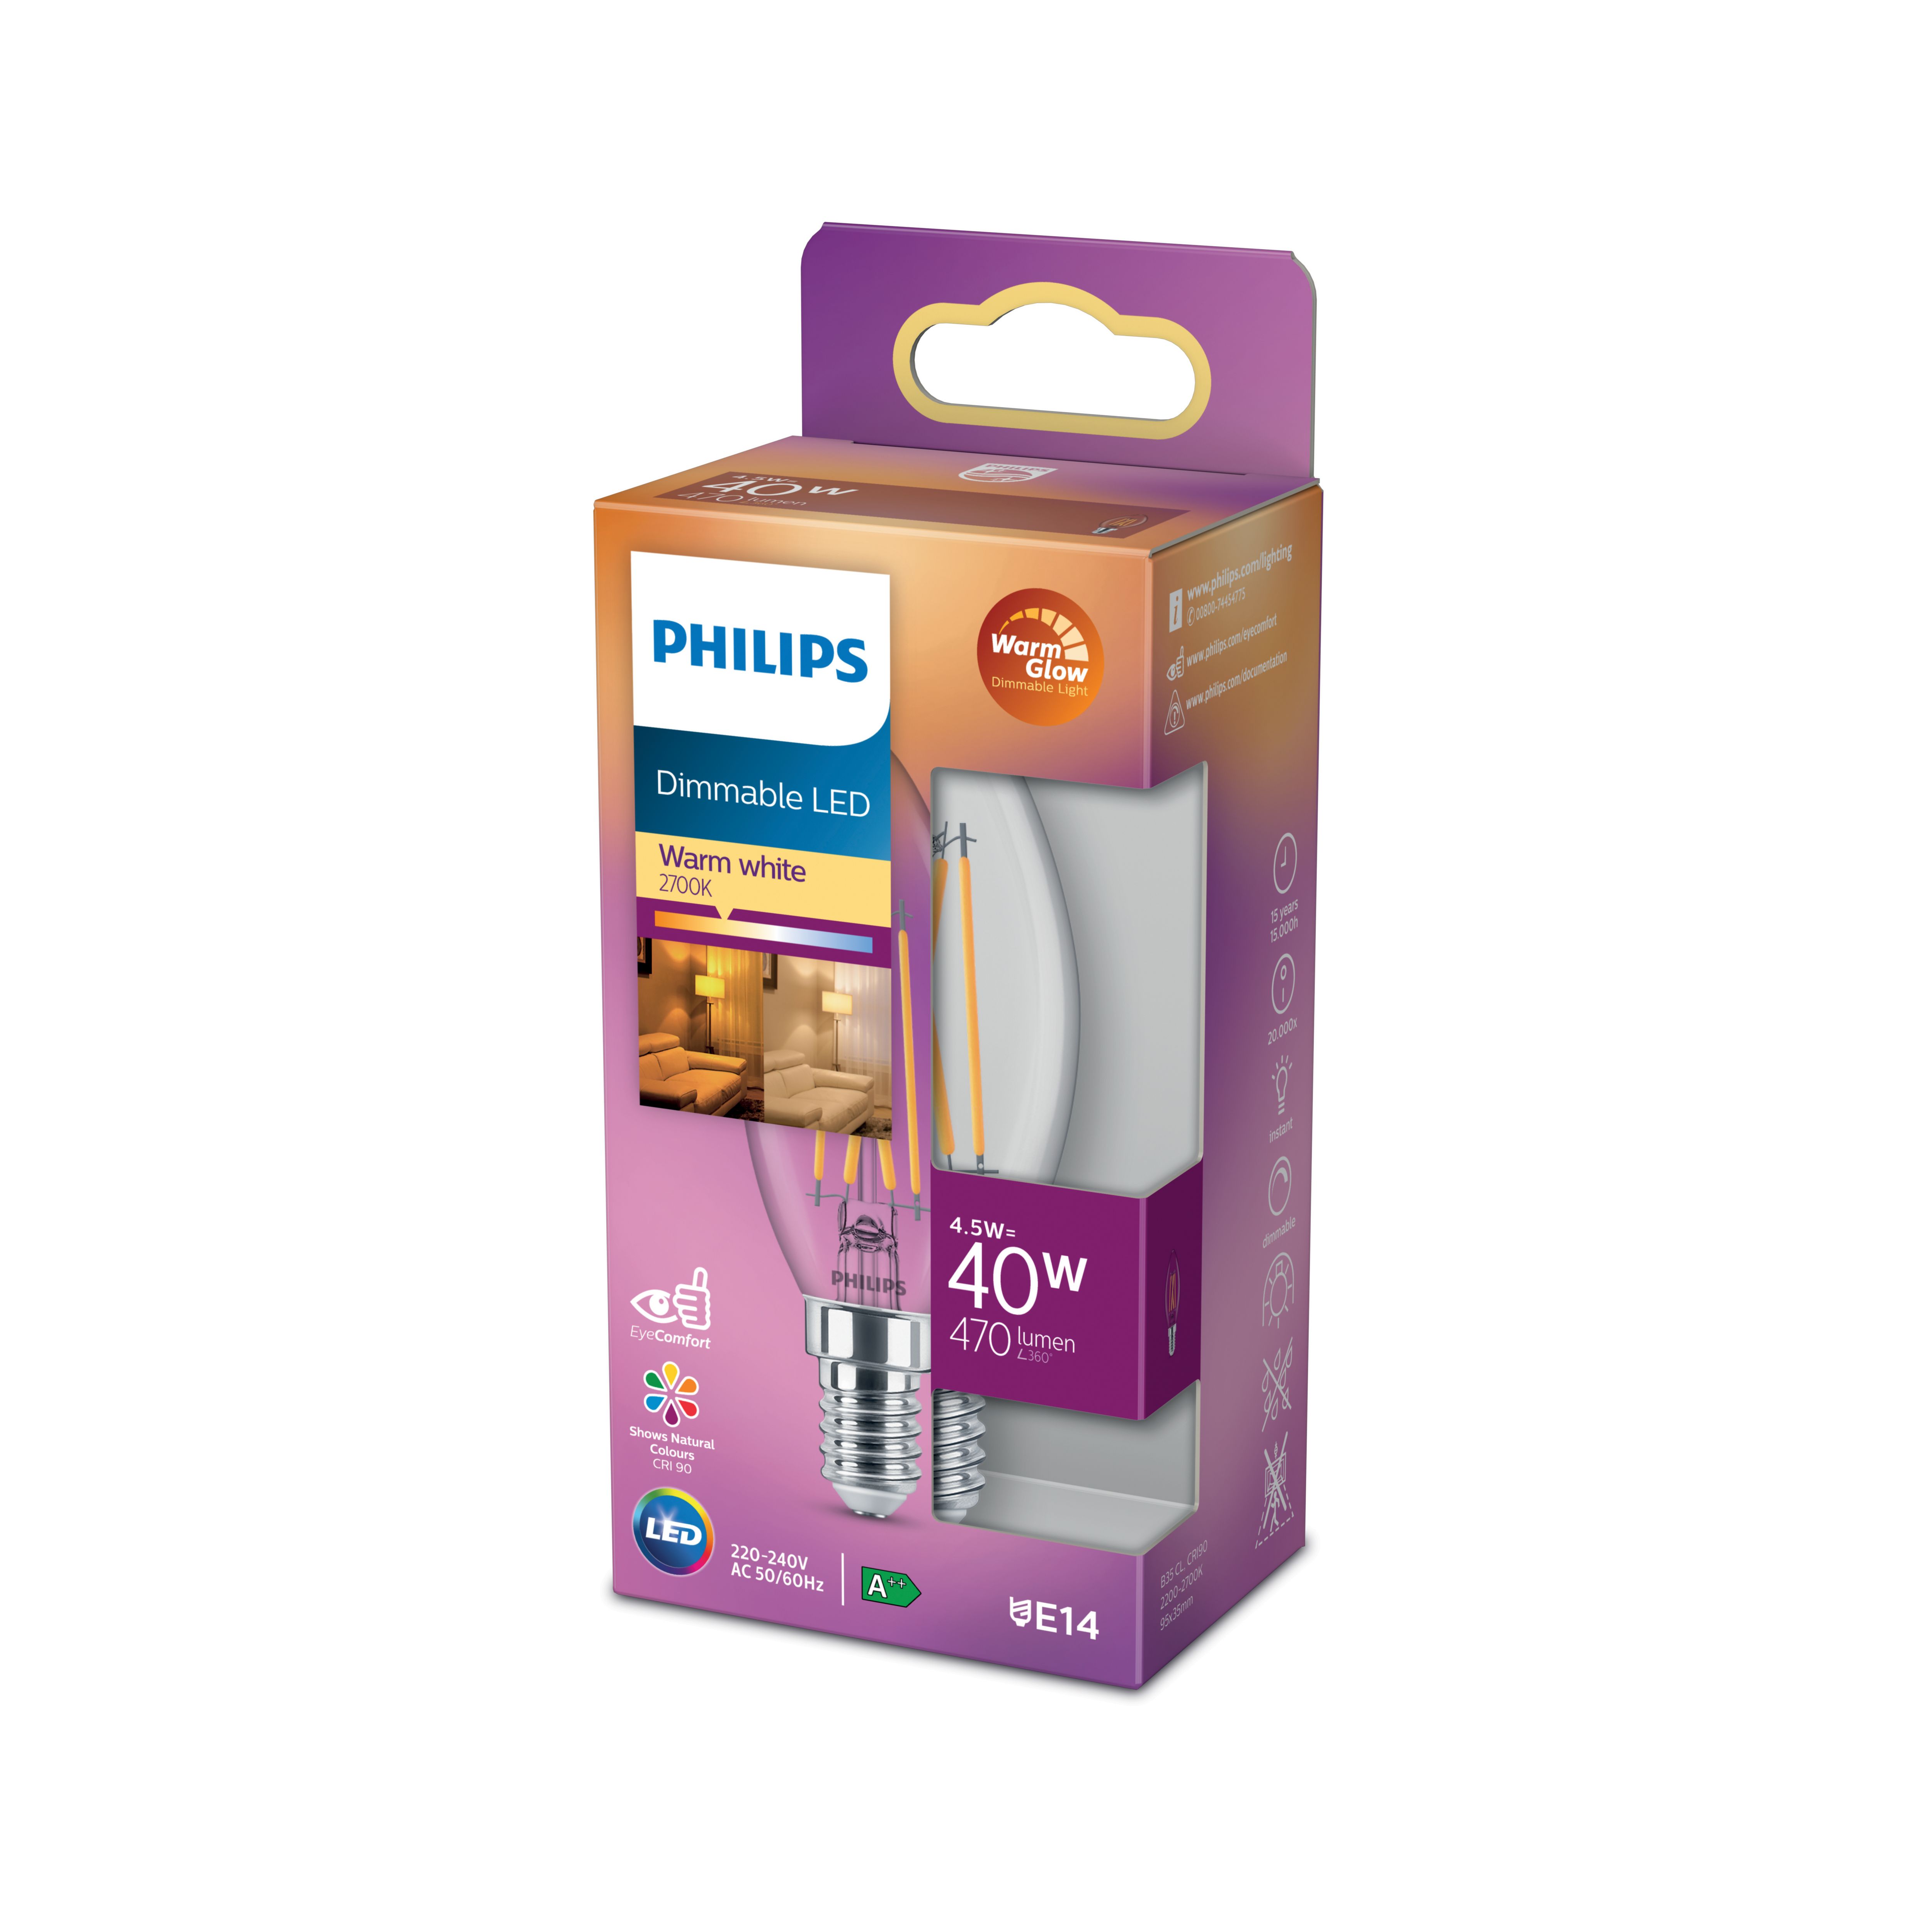 Philips Classic 6W 470lm Candle Warm white LED Dimmable Filament Light bulb